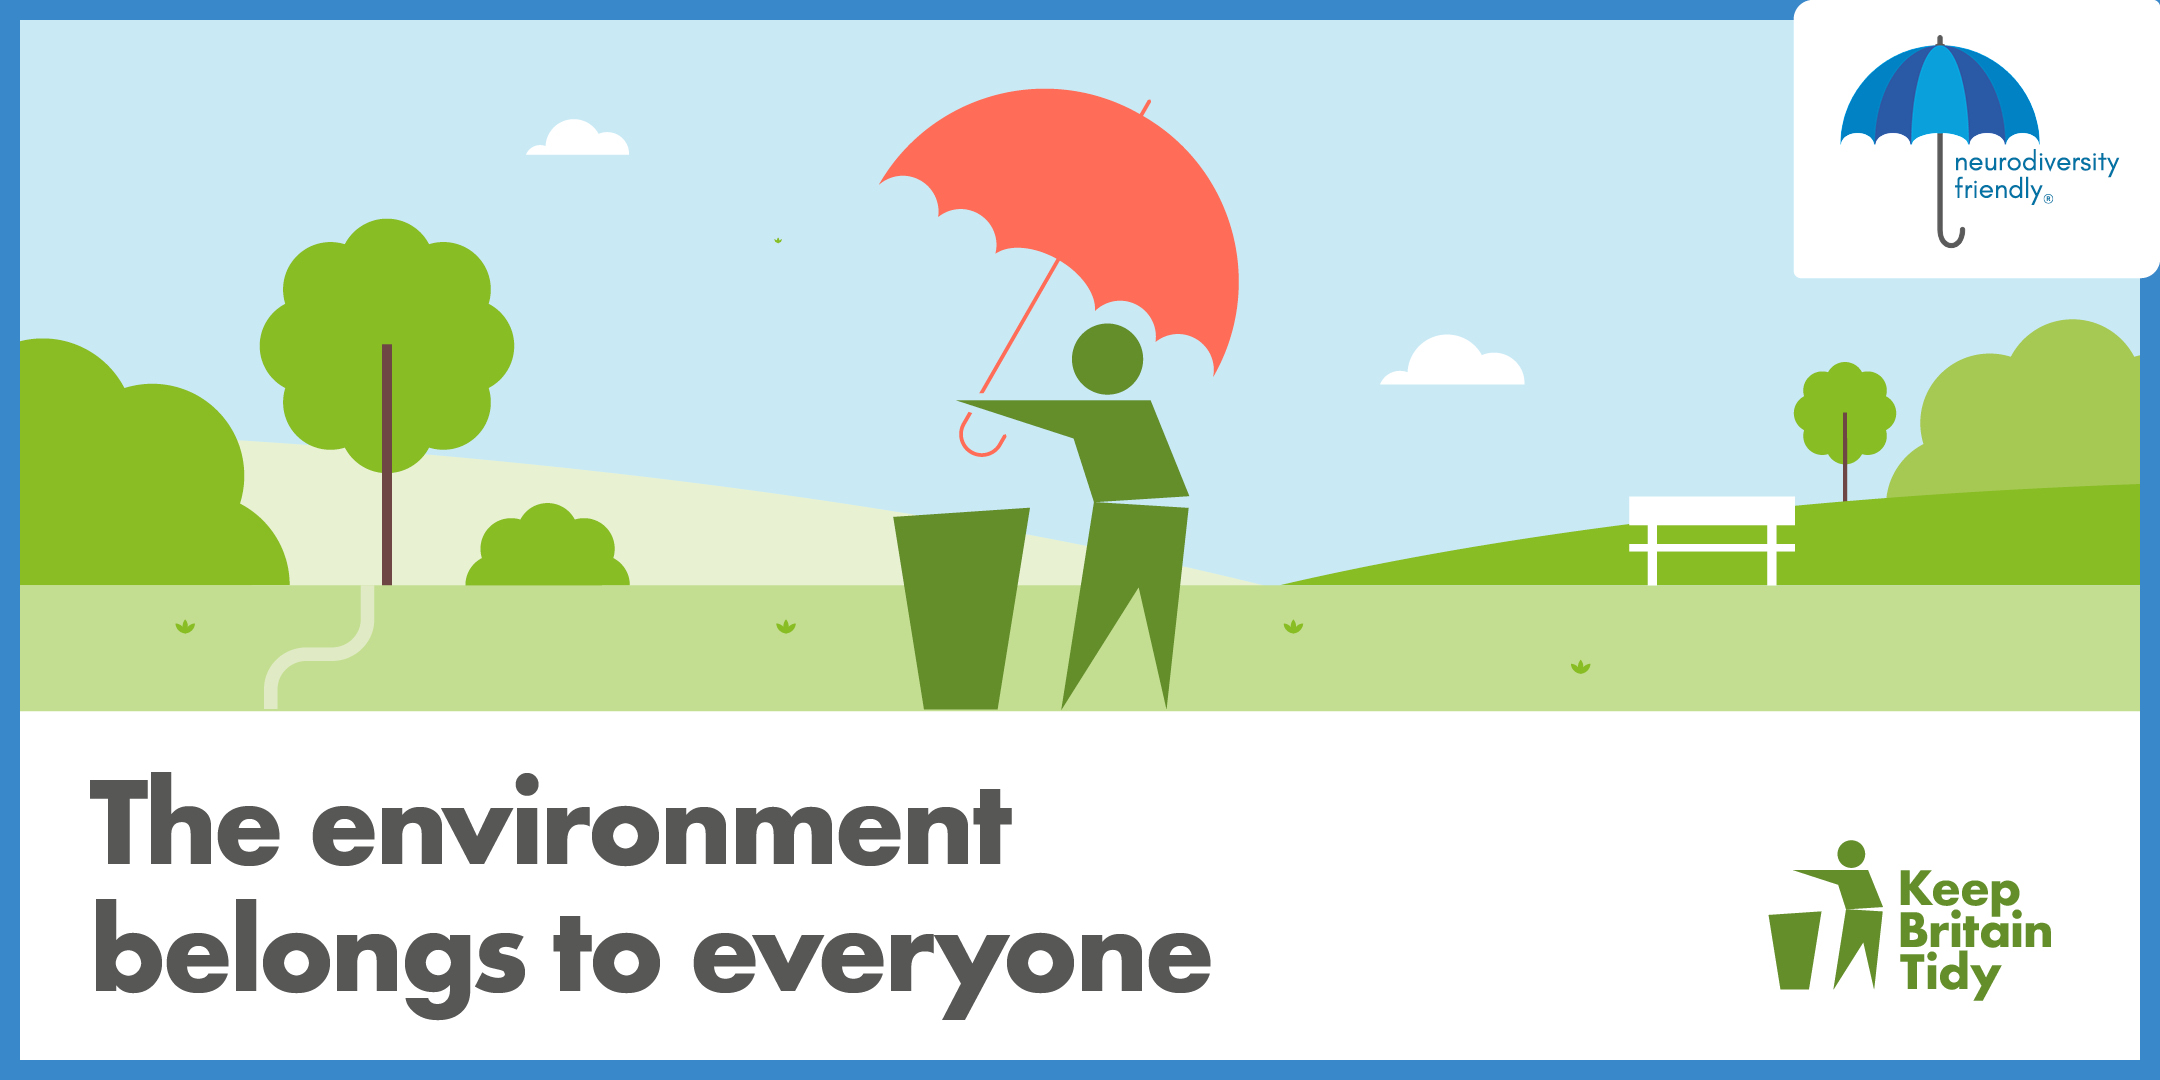 A Tidyman is pictured with an umbrella. Text reads "The environment belongs to everyone".